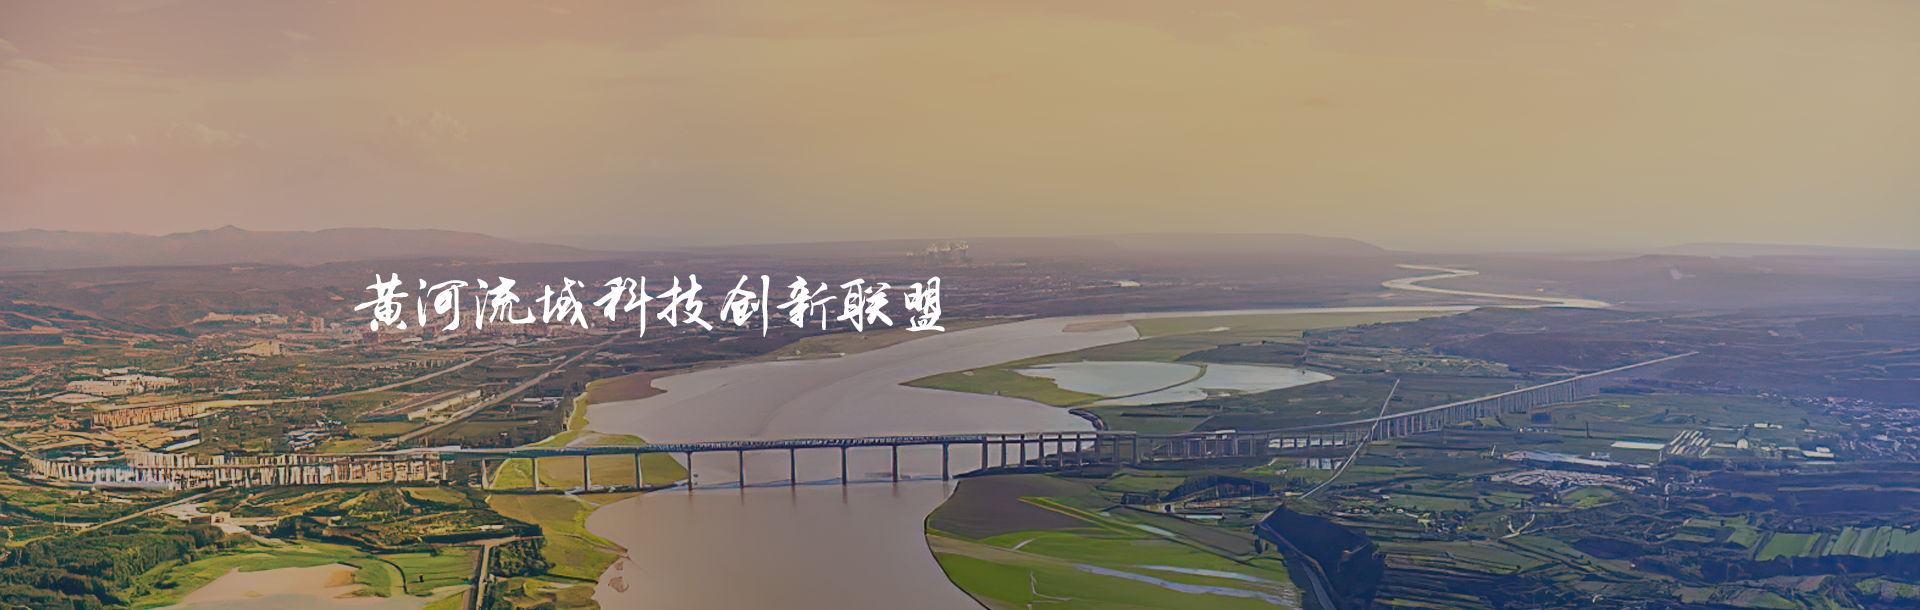 banner-黄河.png